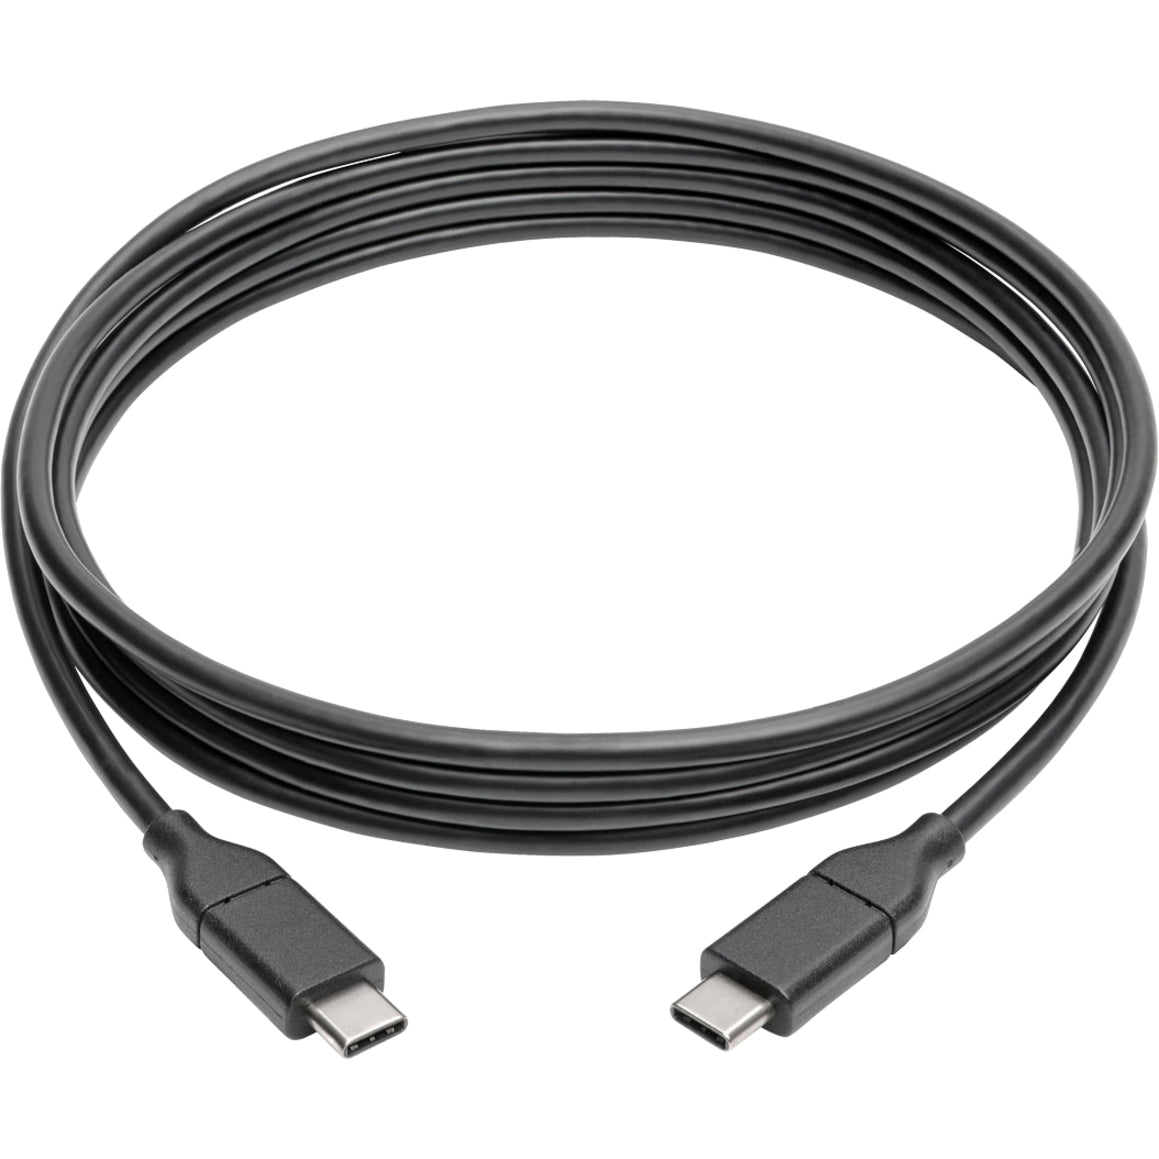 Tripp Lite U040-006-C-5A USB 2.0 Hi-Speed Cable with 5A Rating, USB-C to USB-C (M/M), 6 ft., Molded, Corrosion Resistant, Strain Relief, EMI/RF Protection, Reversible